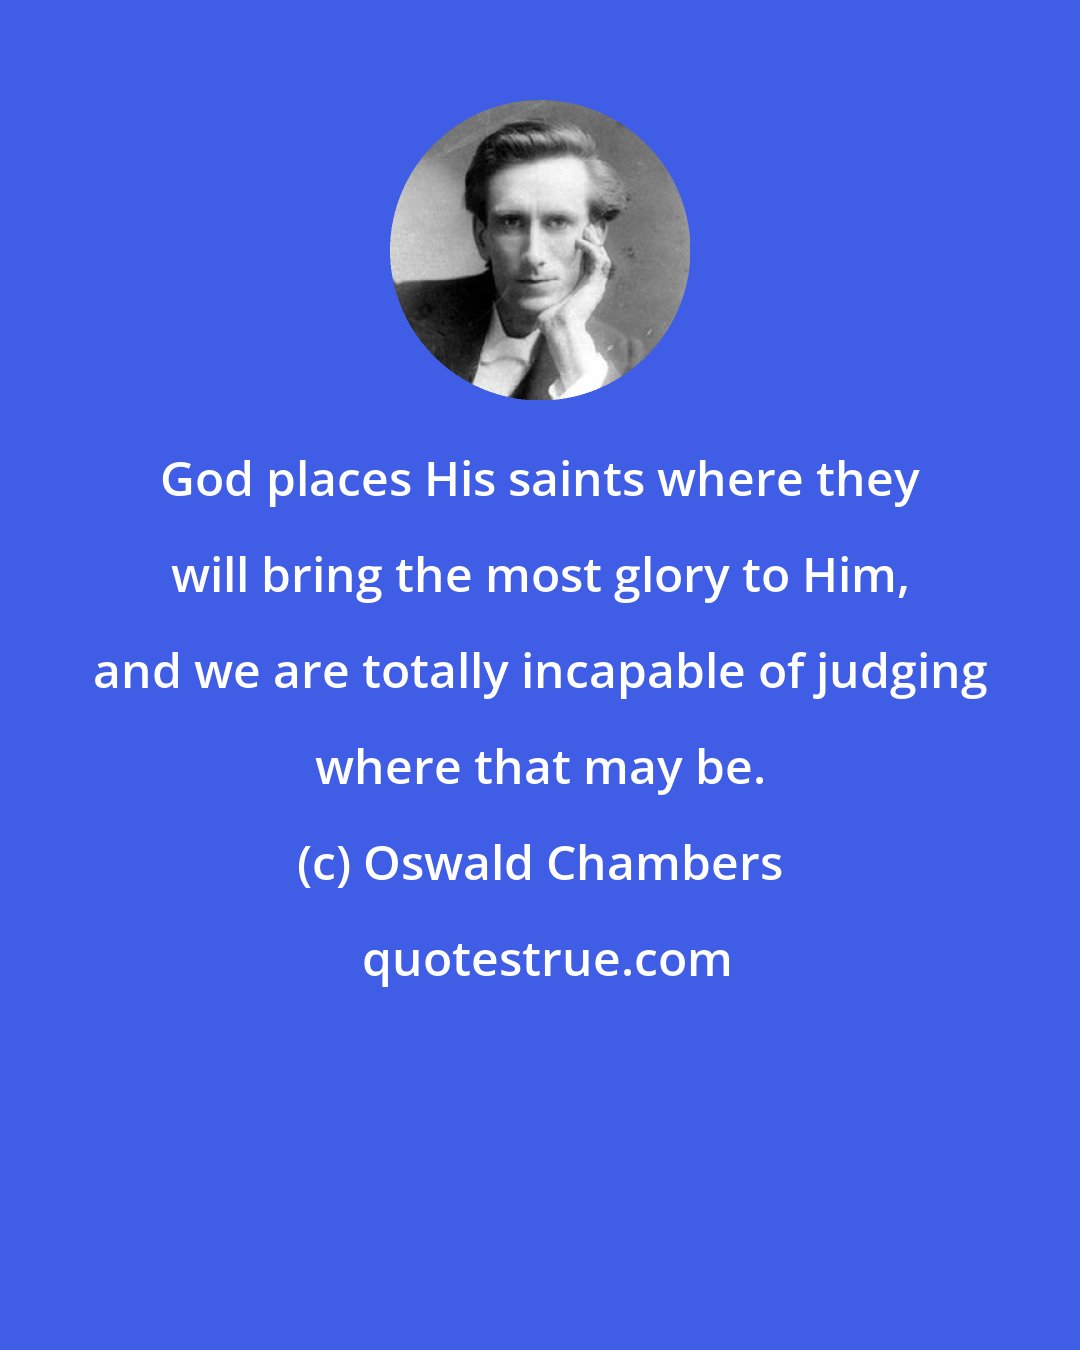 Oswald Chambers: God places His saints where they will bring the most glory to Him, and we are totally incapable of judging where that may be.